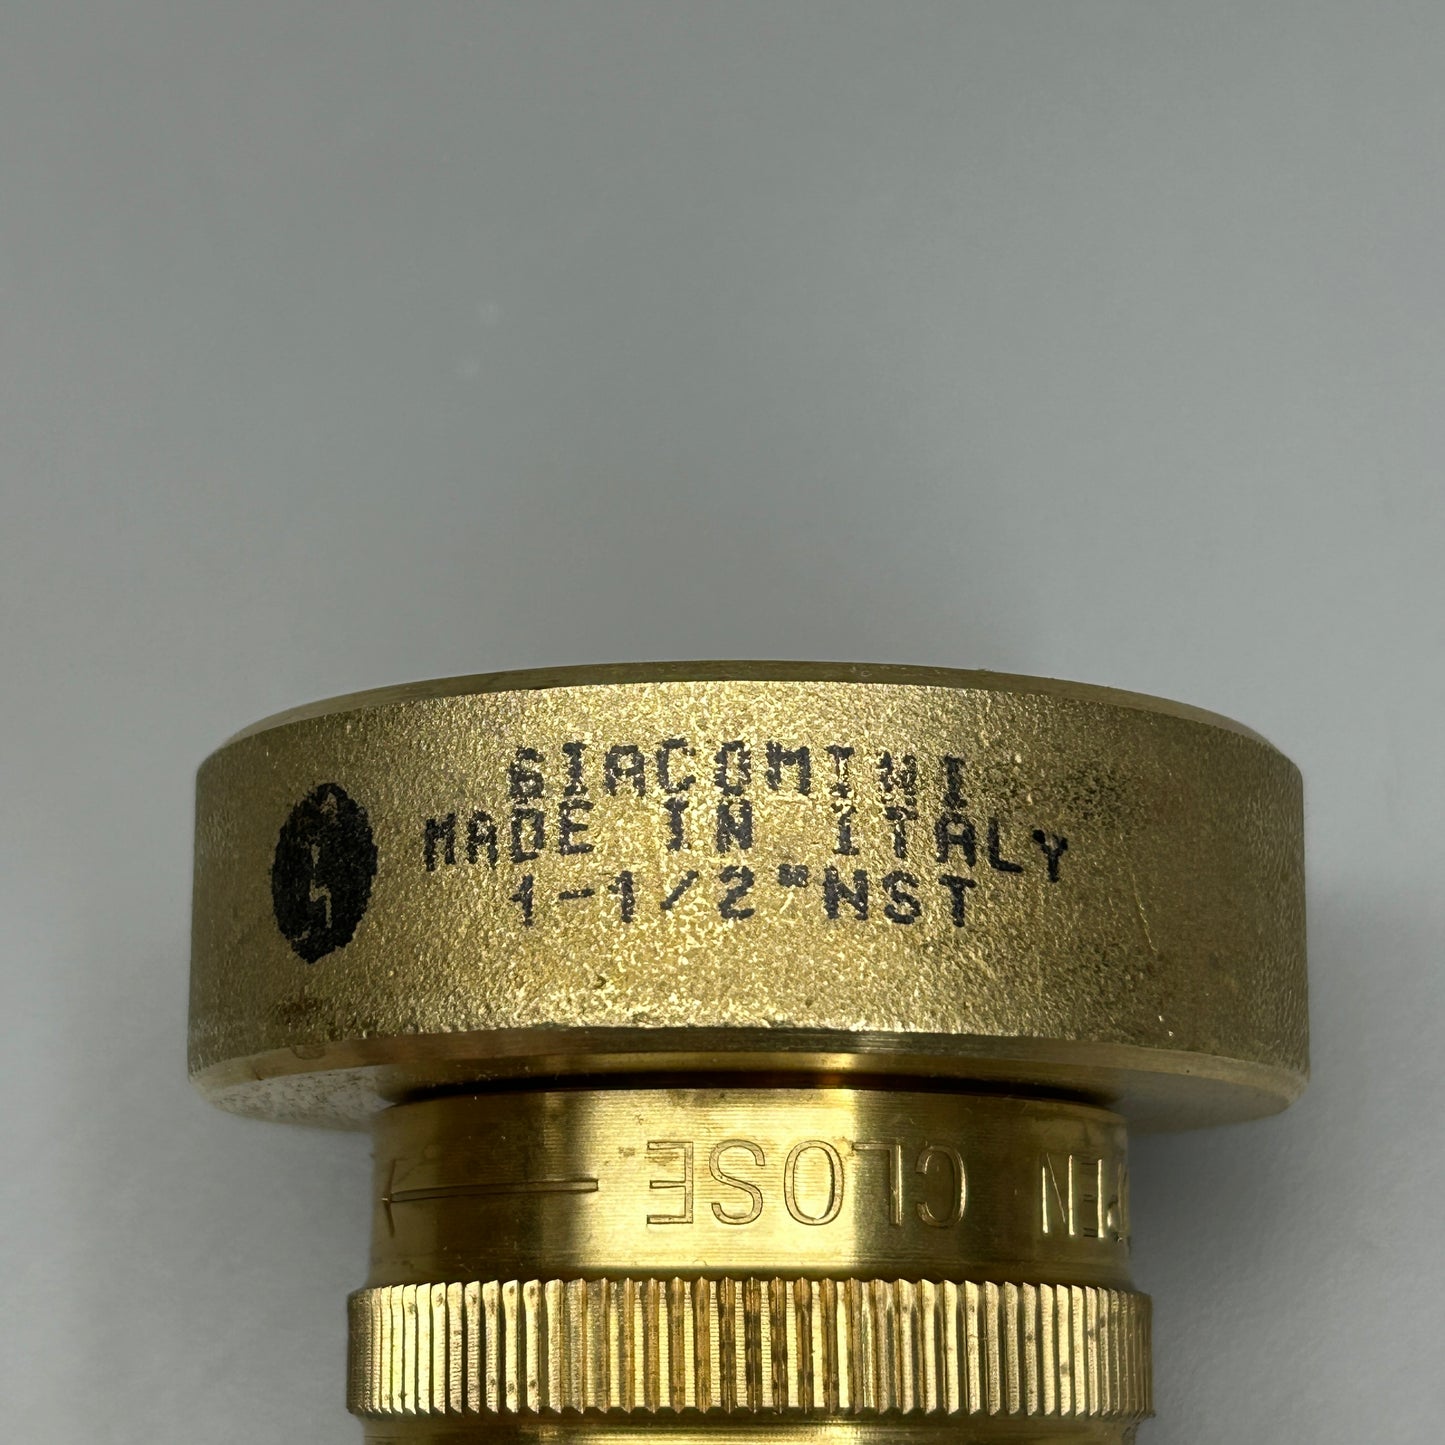 GIACOMINI Brass Adjustable Fog Nozzle 1 1/2" NST A7AY001 (New)